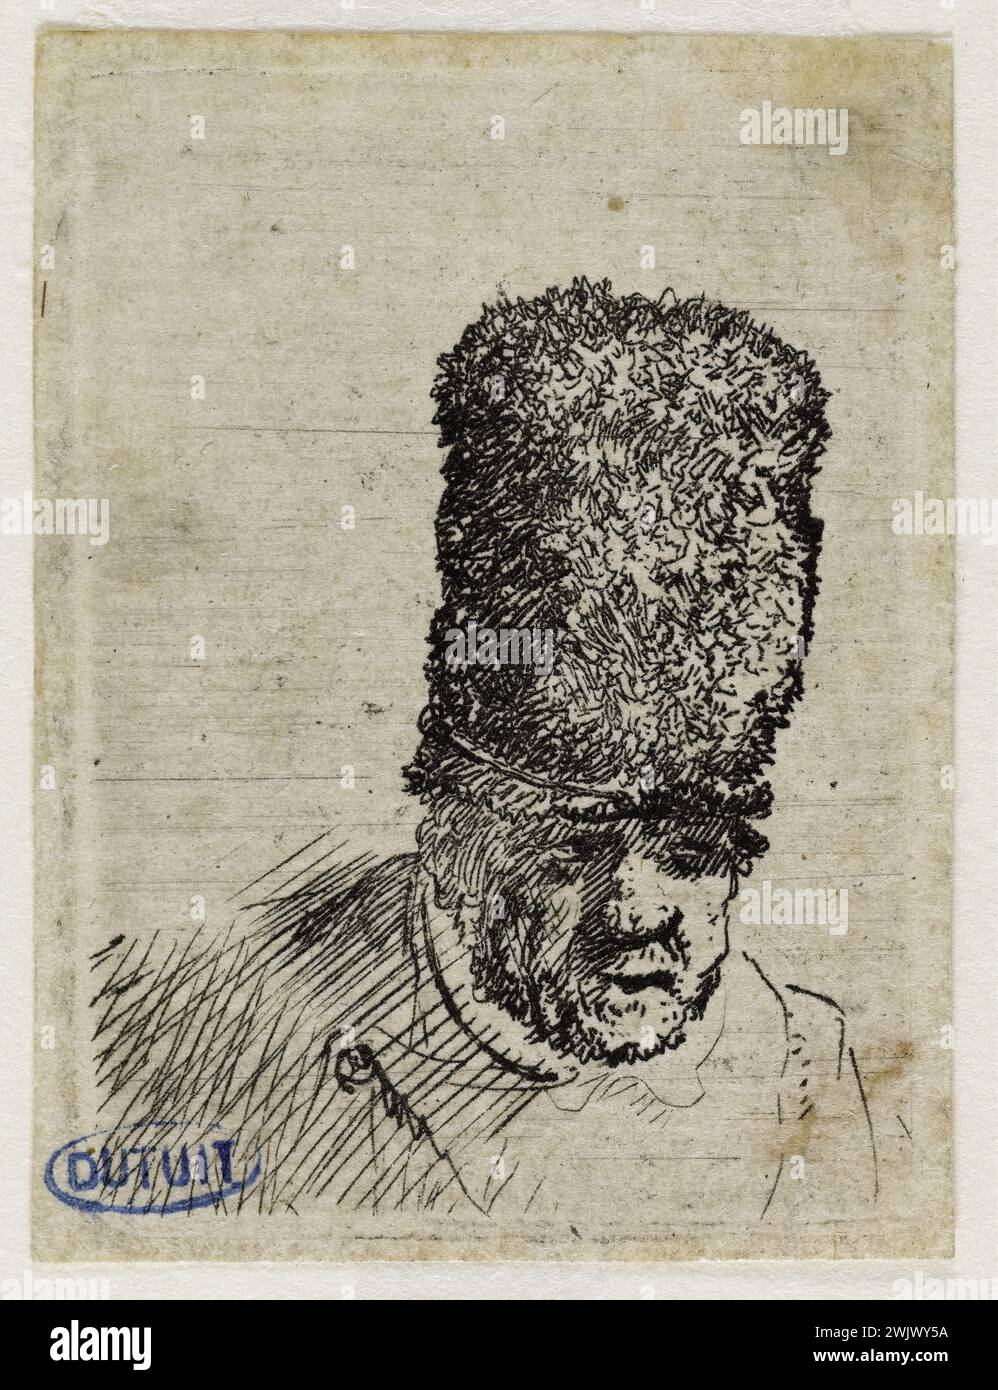 Rembrandt Harmenszoon van Rijn (1606-1669), Dutch painter. Head of an old man with a large stuffed hat: bust (Bartsch 299). Etching on European paper. Museum of Fine Arts of the City of Paris, Petit Palais. 78834-3 Bonnet Fourre, chiaroscuro, headdress, Dutch school, in bust, fur, portrait, baroque style, old man, old man, XVIIth 17th 18th 17th 17th 17th century, hat Stock Photo